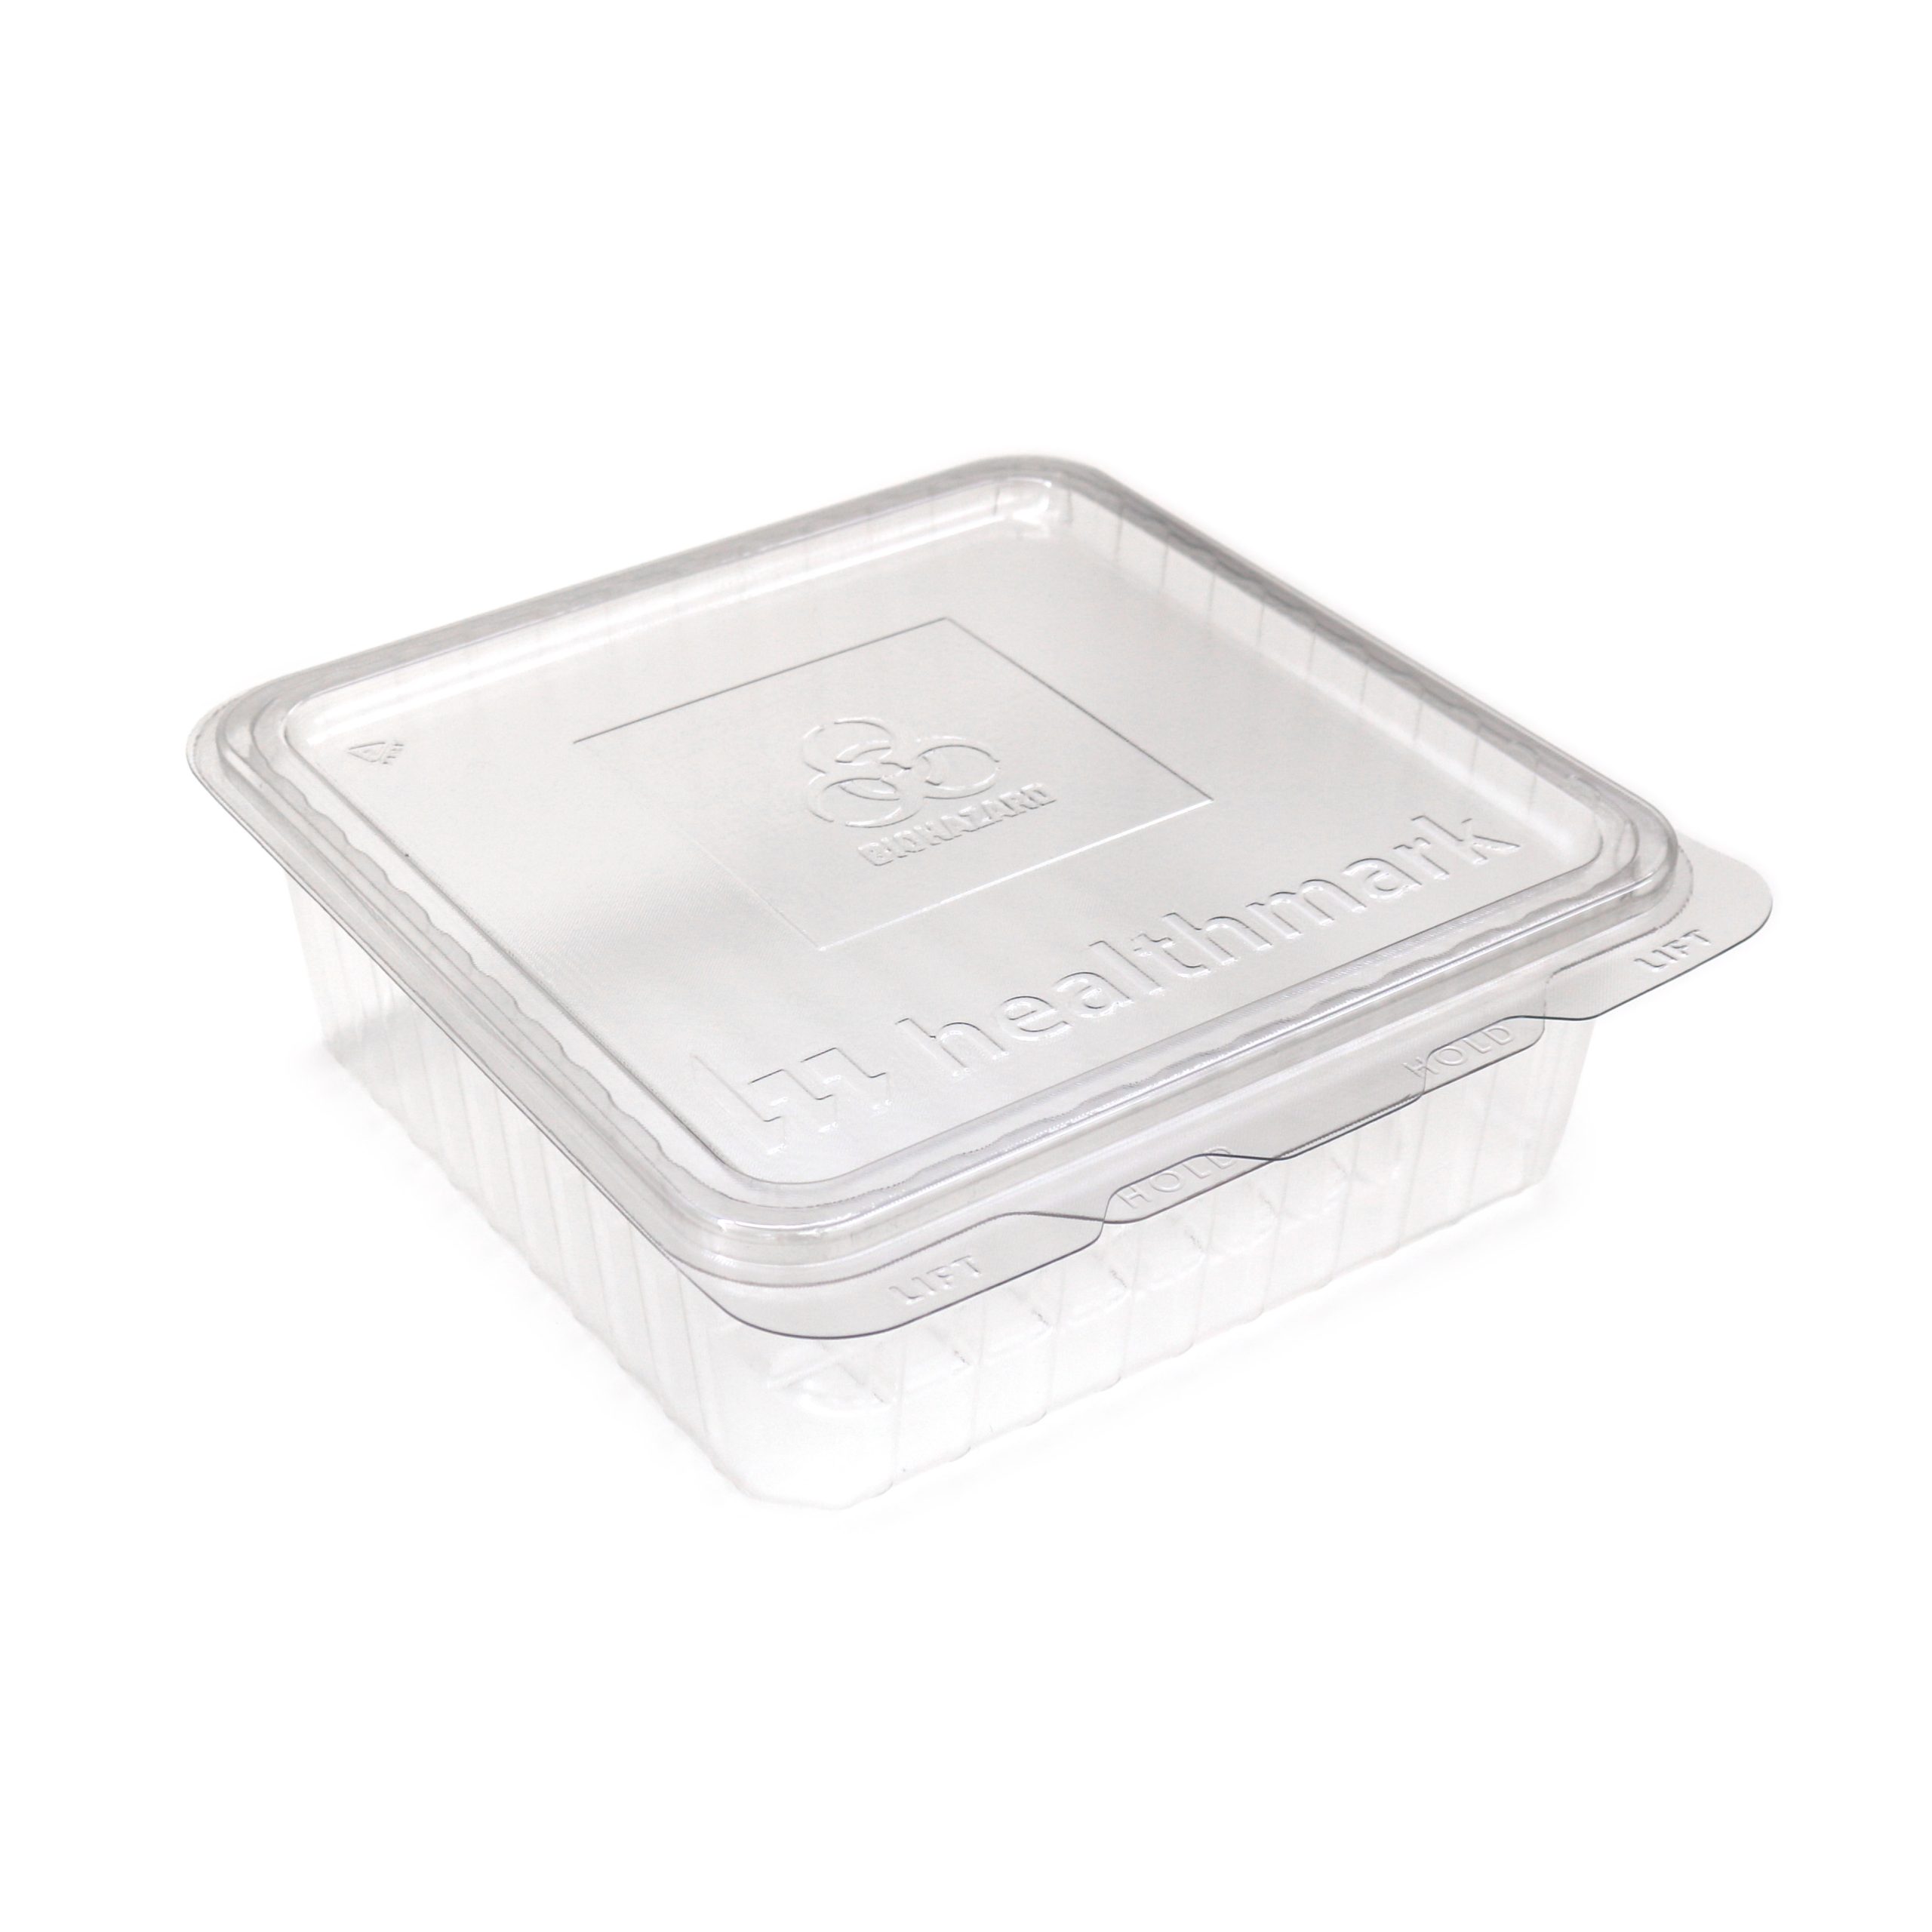 Reusable Endoscope Transport Trays and Lids for Scope Transit